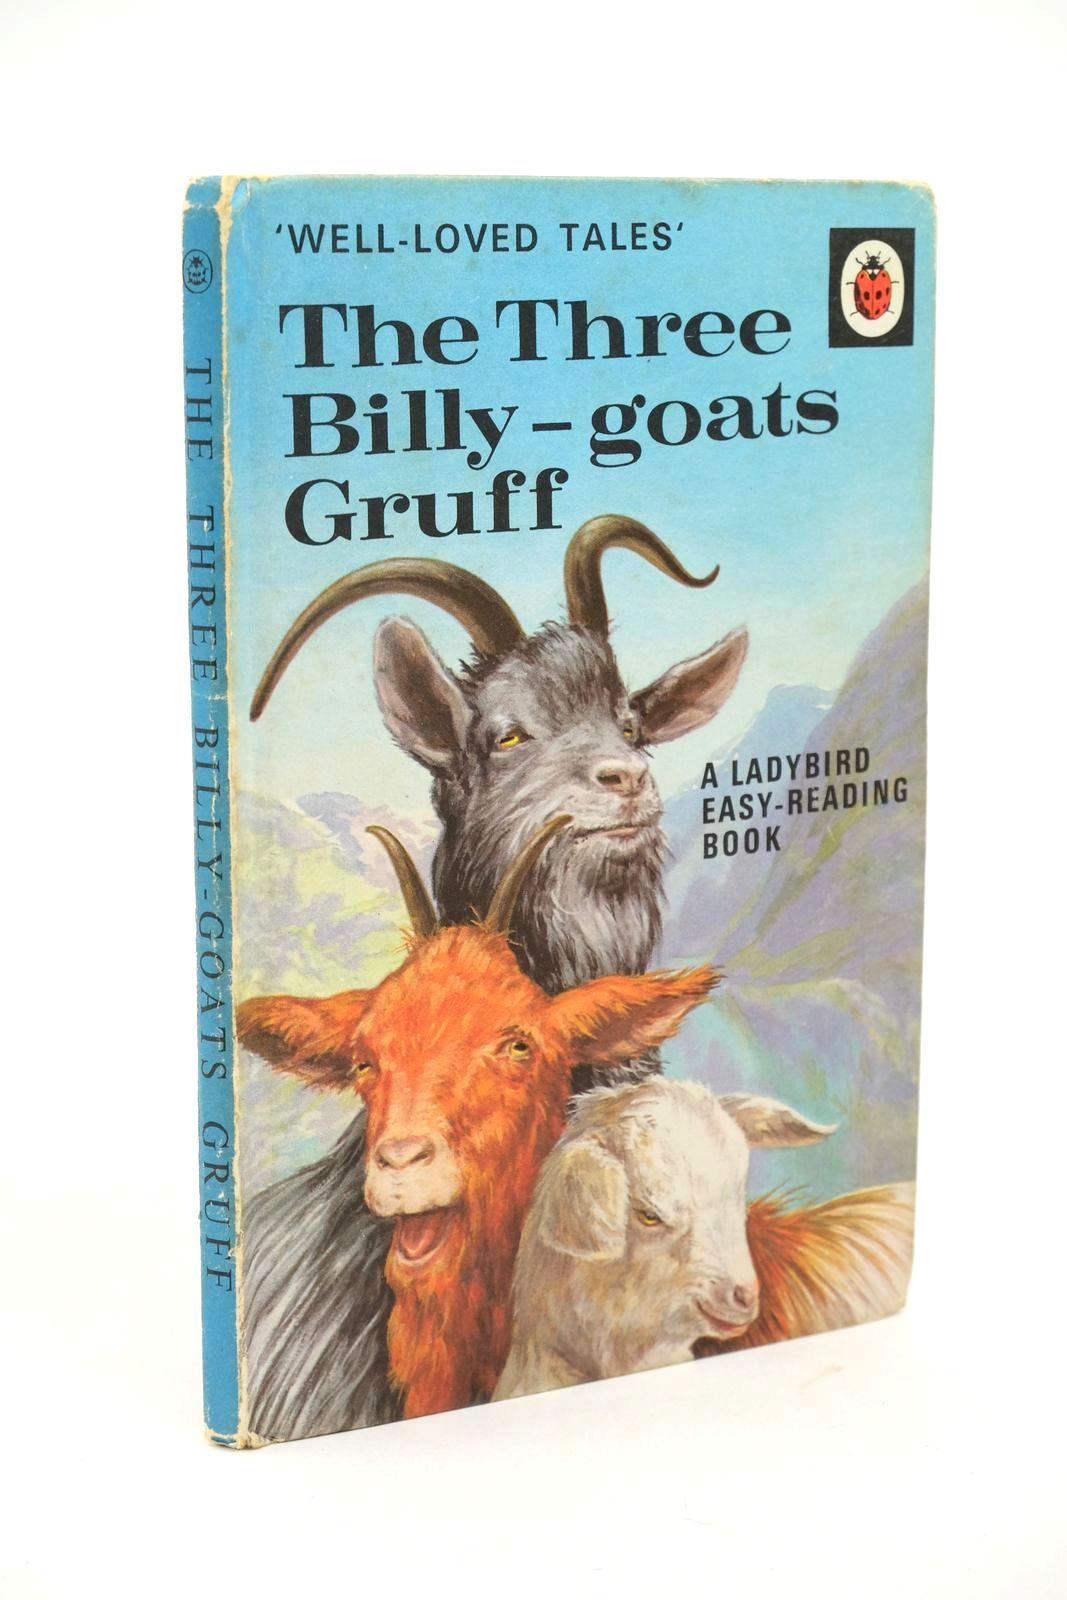 Photo of THE THREE BILLY-GOATS GRUFF written by Southgate, Vera illustrated by Lumley, Robert published by Wills &amp; Hepworth Ltd. (STOCK CODE: 1323155)  for sale by Stella & Rose's Books